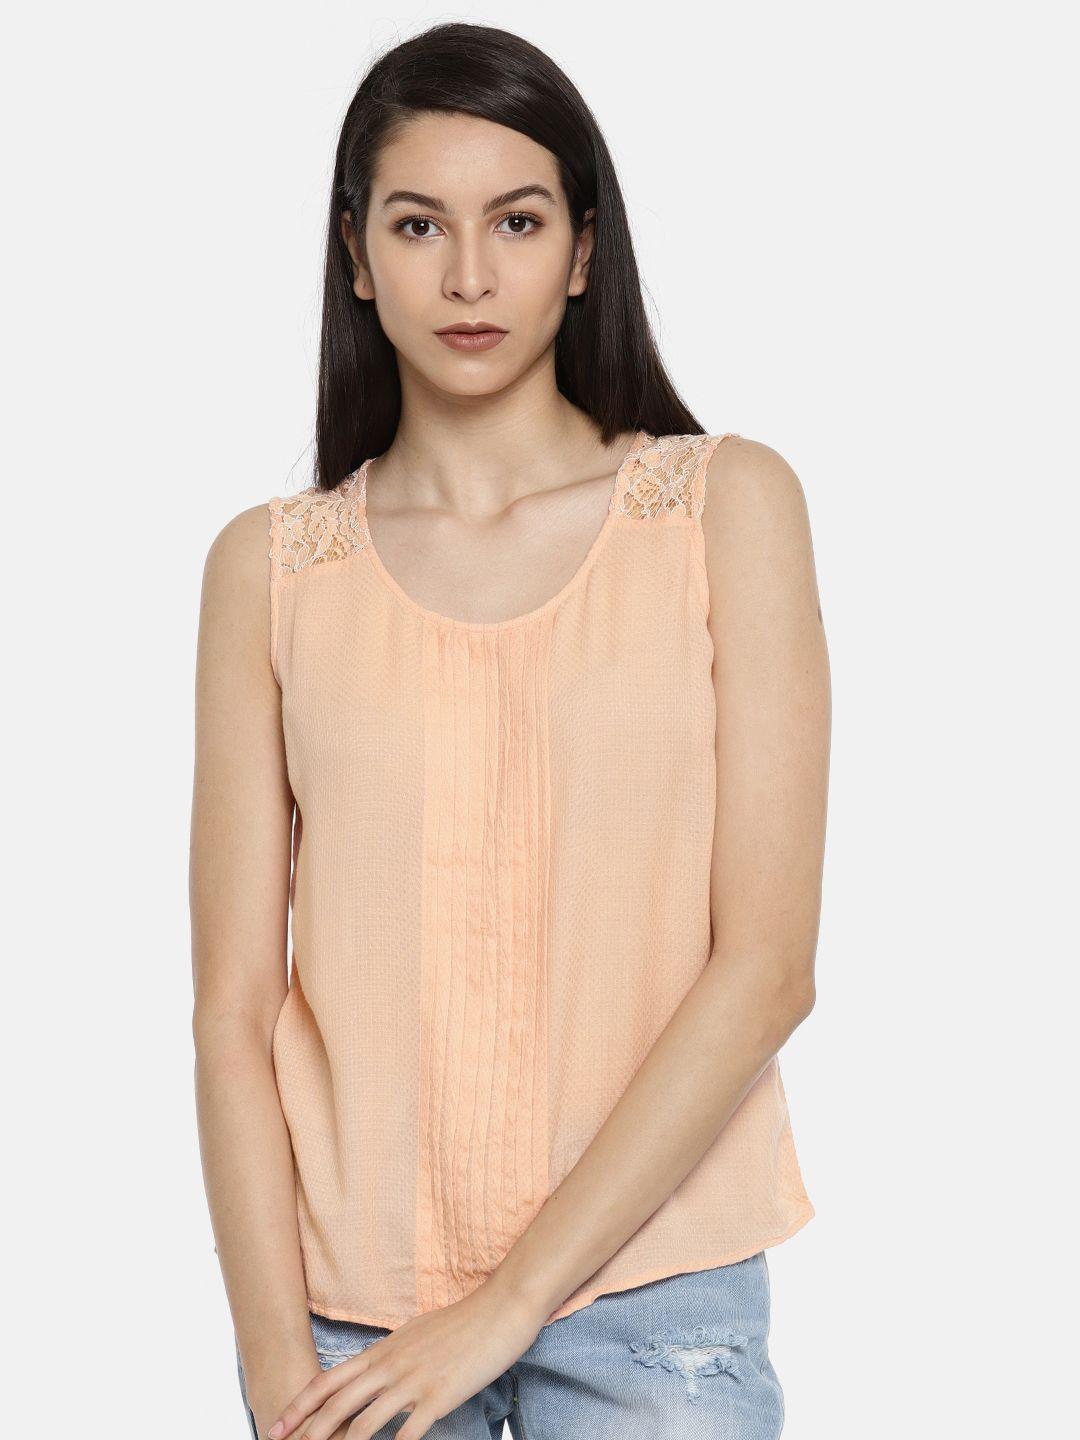 allen solly woman women coral pink solid top